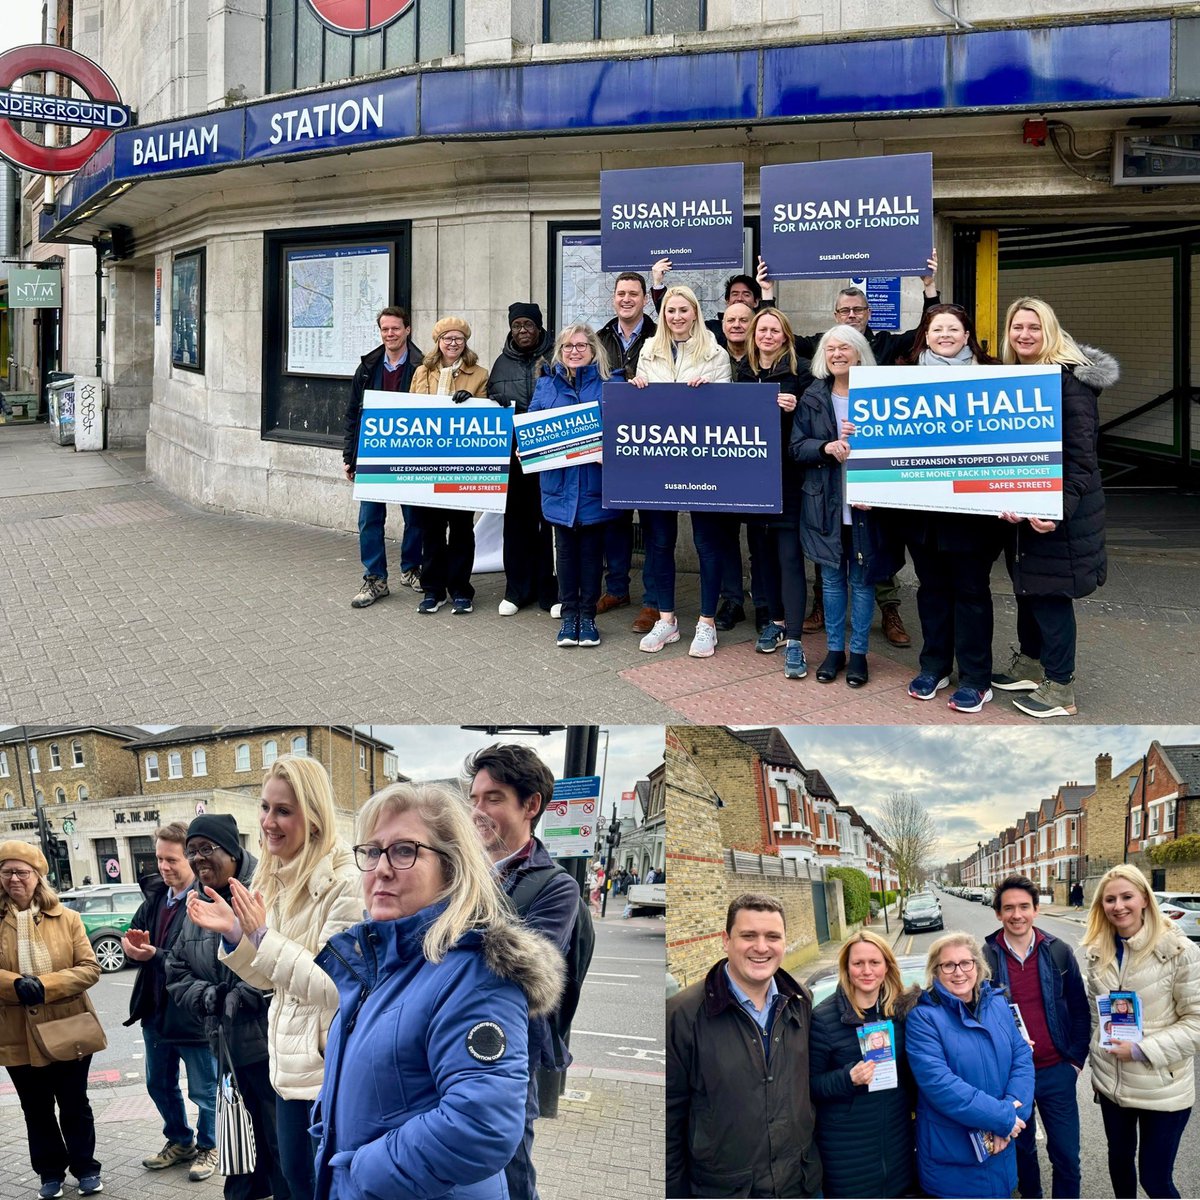 Great to be out in #Balham today campaigning for 2 amazing women - @Councillorsuzie for London Mayor and @CllrCoxEleanor for M&W GLA spokeswoman. @cwowomen @TeamLondonUK @BatterseaTories #WomenHistoryMonth